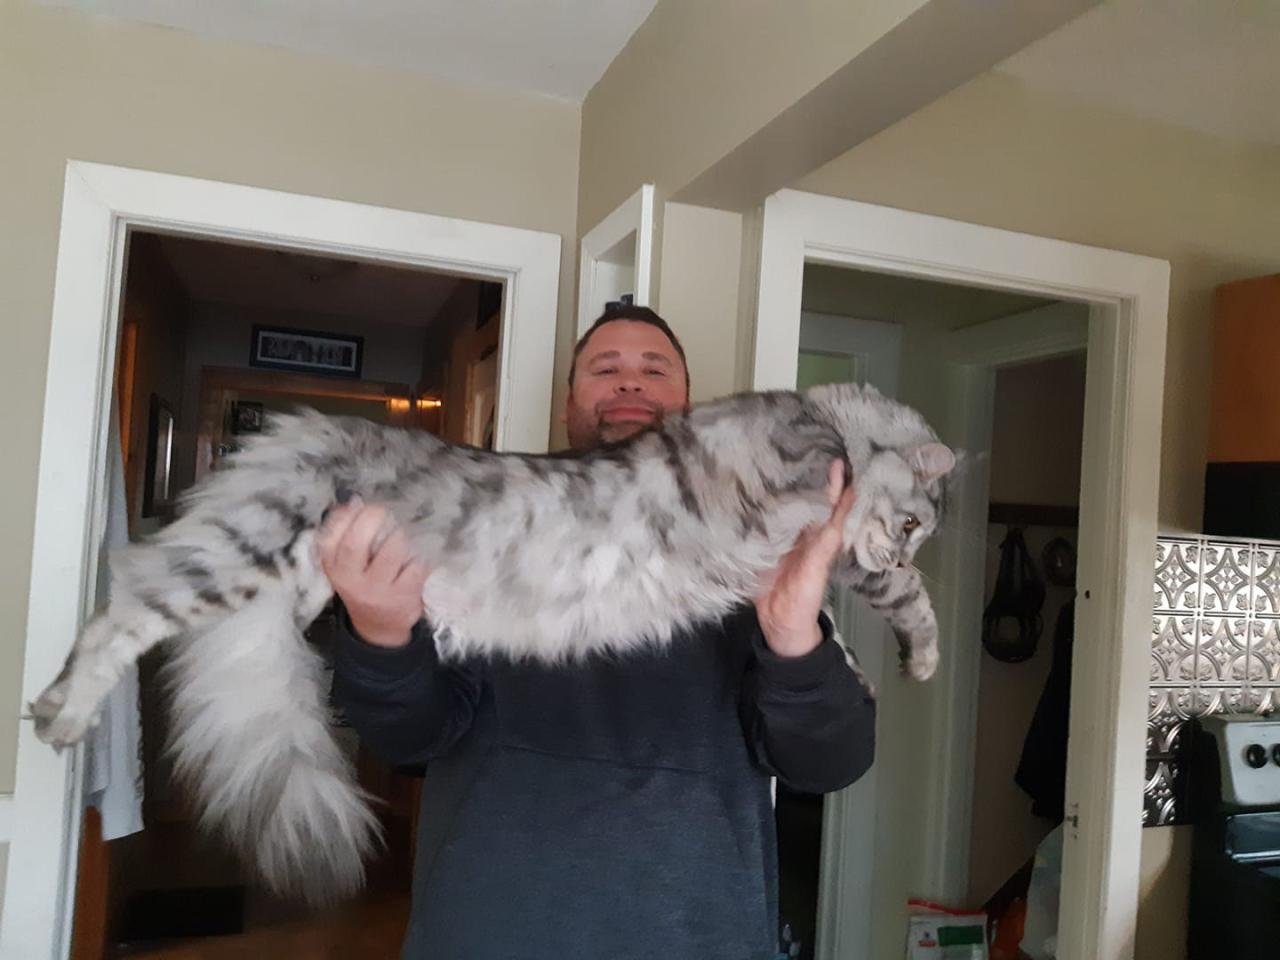 Mainecoon cats for sale near me